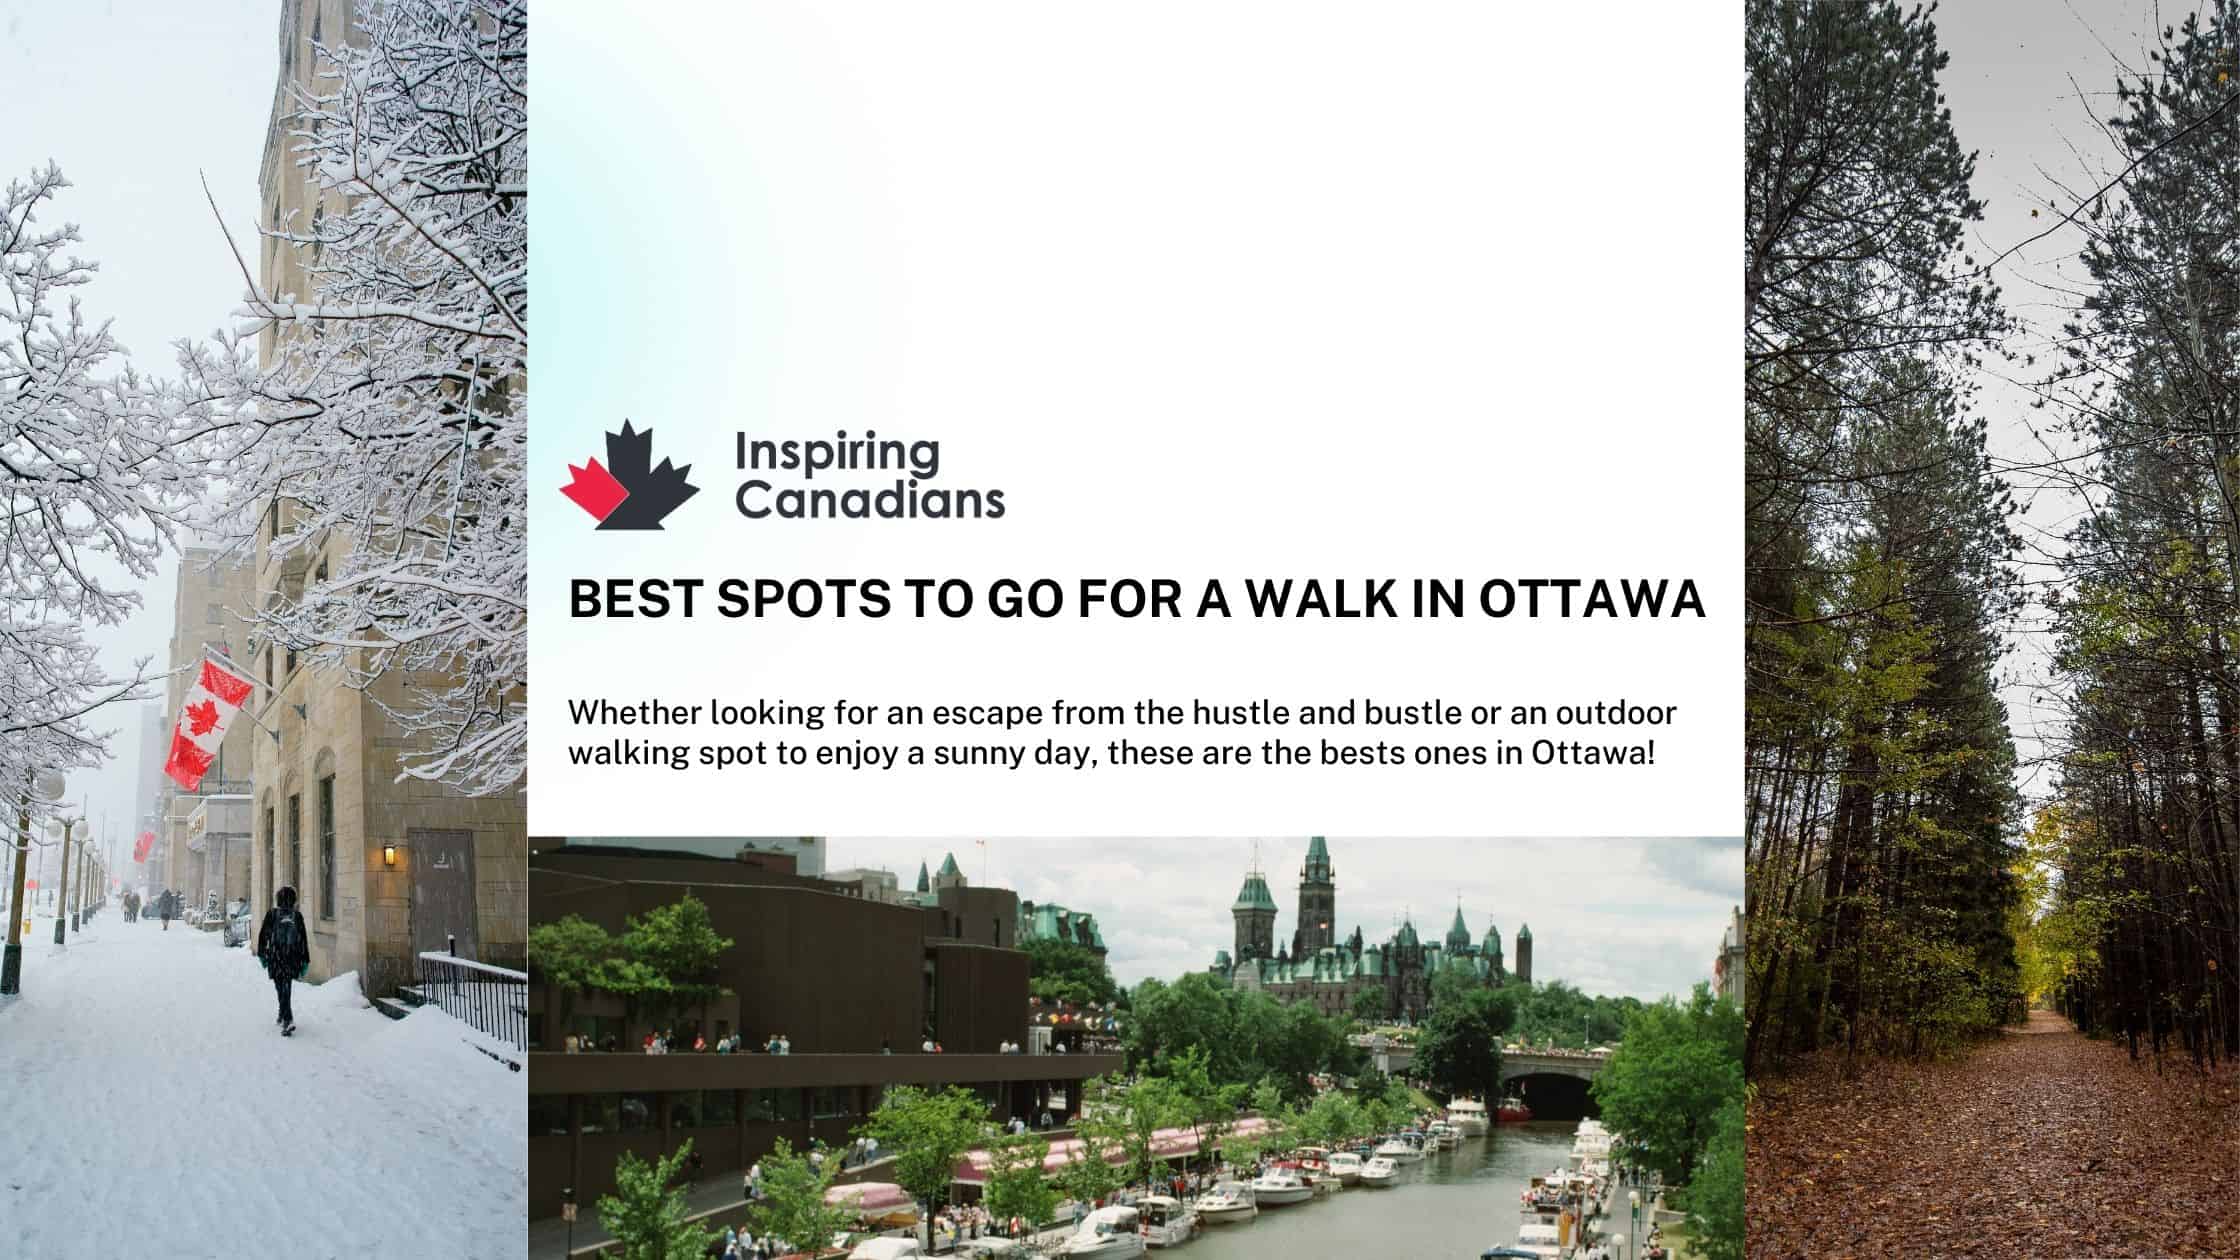 Best spots to go for a walk in Ottawa